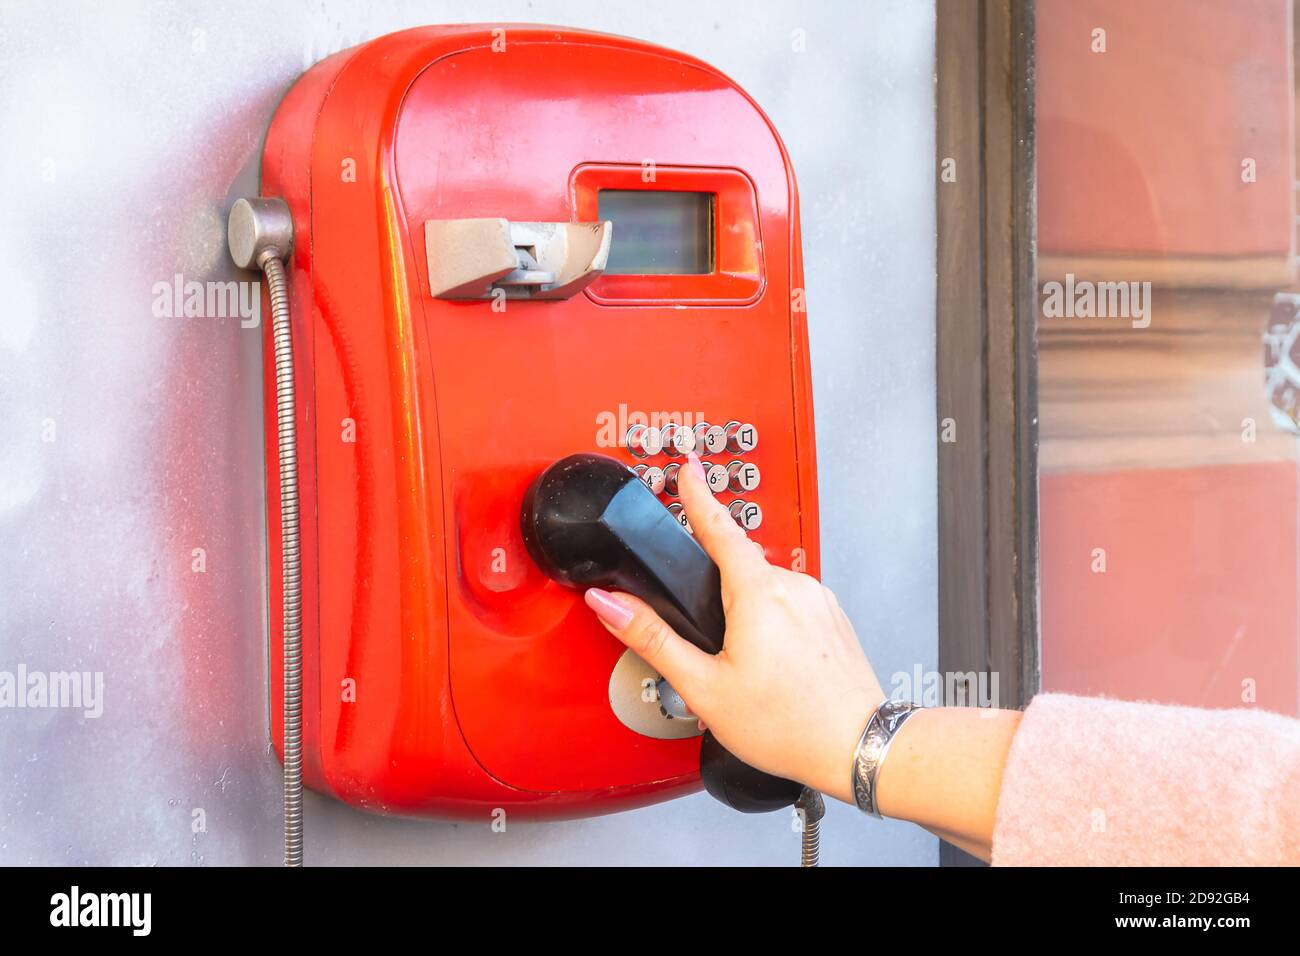 a woman's hand dials a phone number on a public pay phone Stock Photo